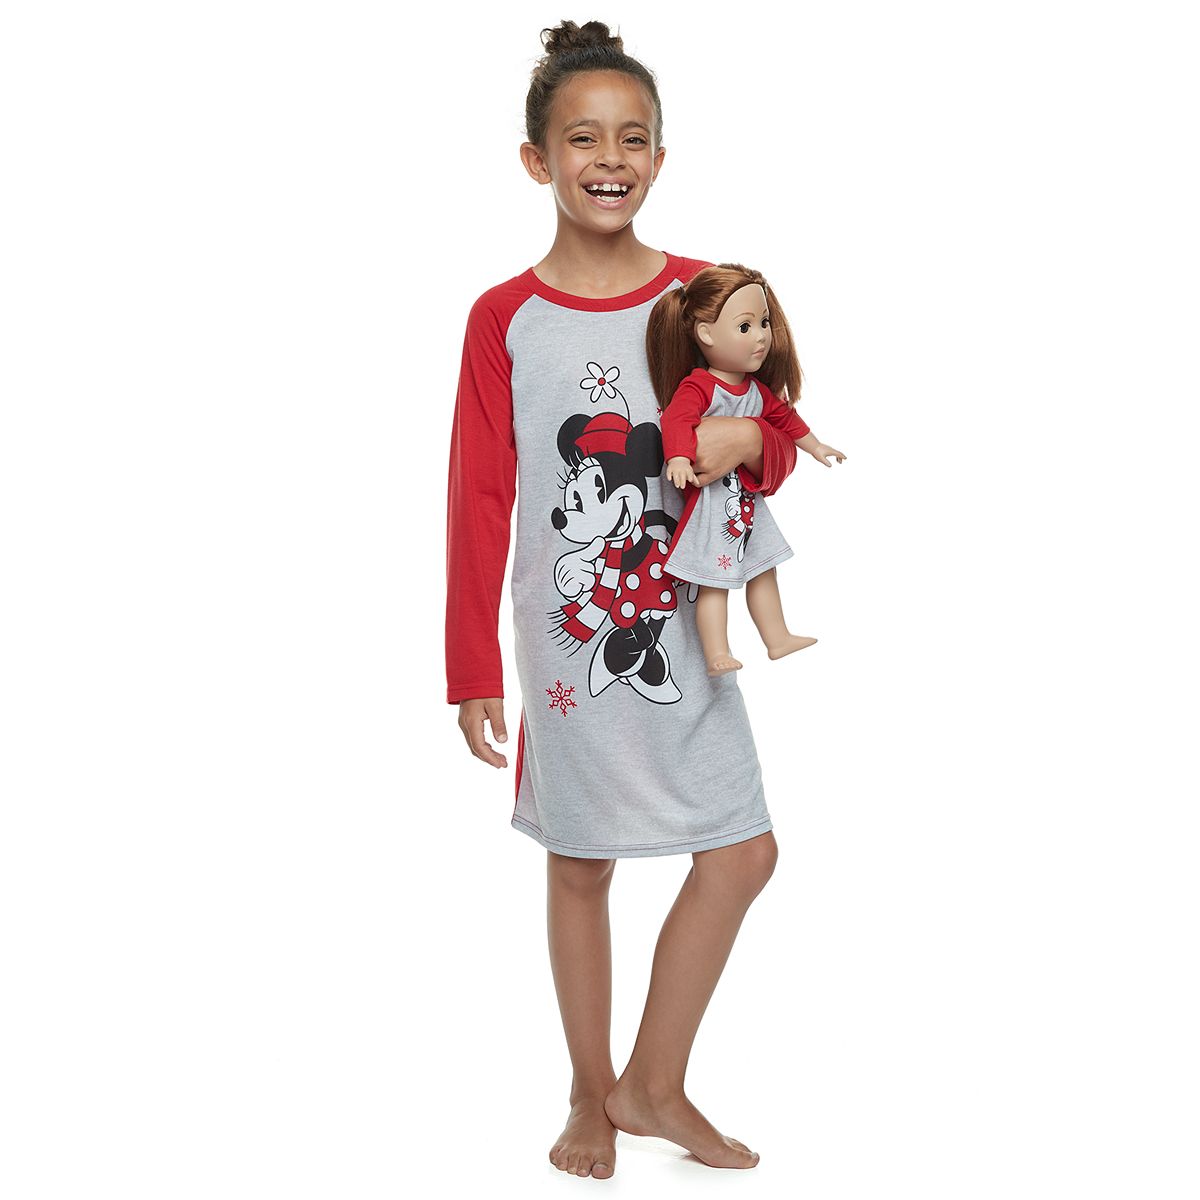 Girls' Christmas Sleepwear: Shop for Holiday Essentials for the Family